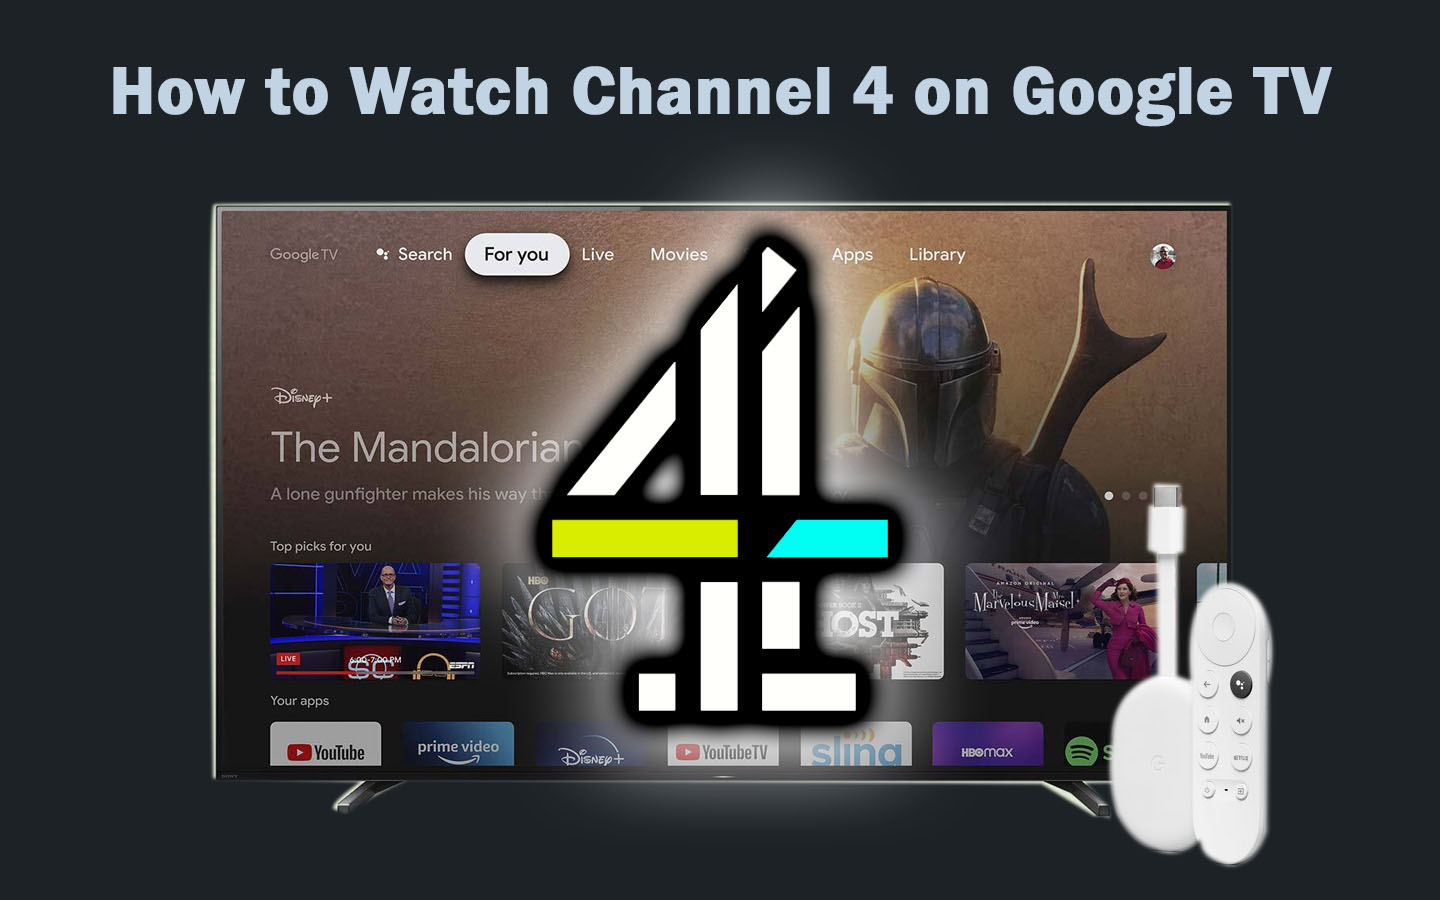 How to Watch Channel 4 on Google TV